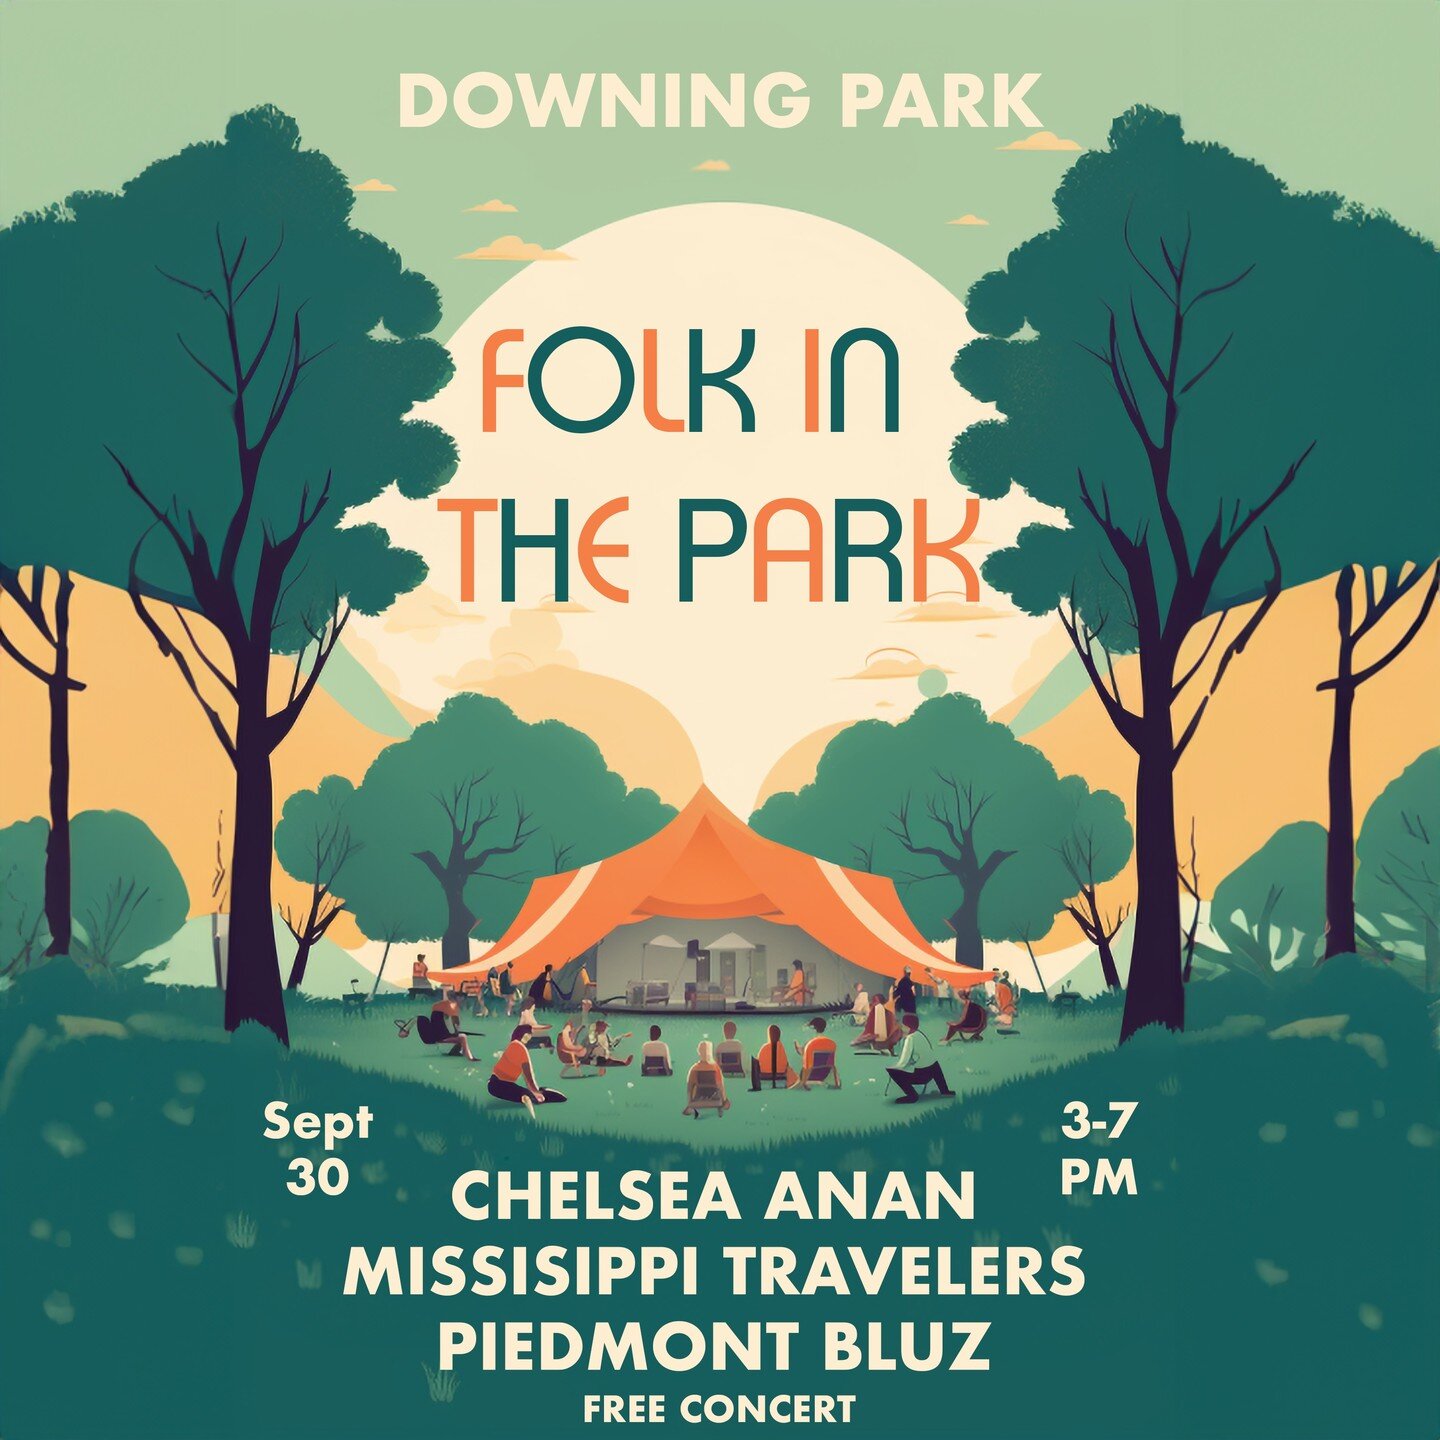 FREE CONCERT Sept 30th 3-7pm

Come out to our beautiful park for Chelsea Anan, Missisippi Travelers, and Piedmont Bluz at the end of this month. Rain or Shine. Bring your own chairs or blankets.